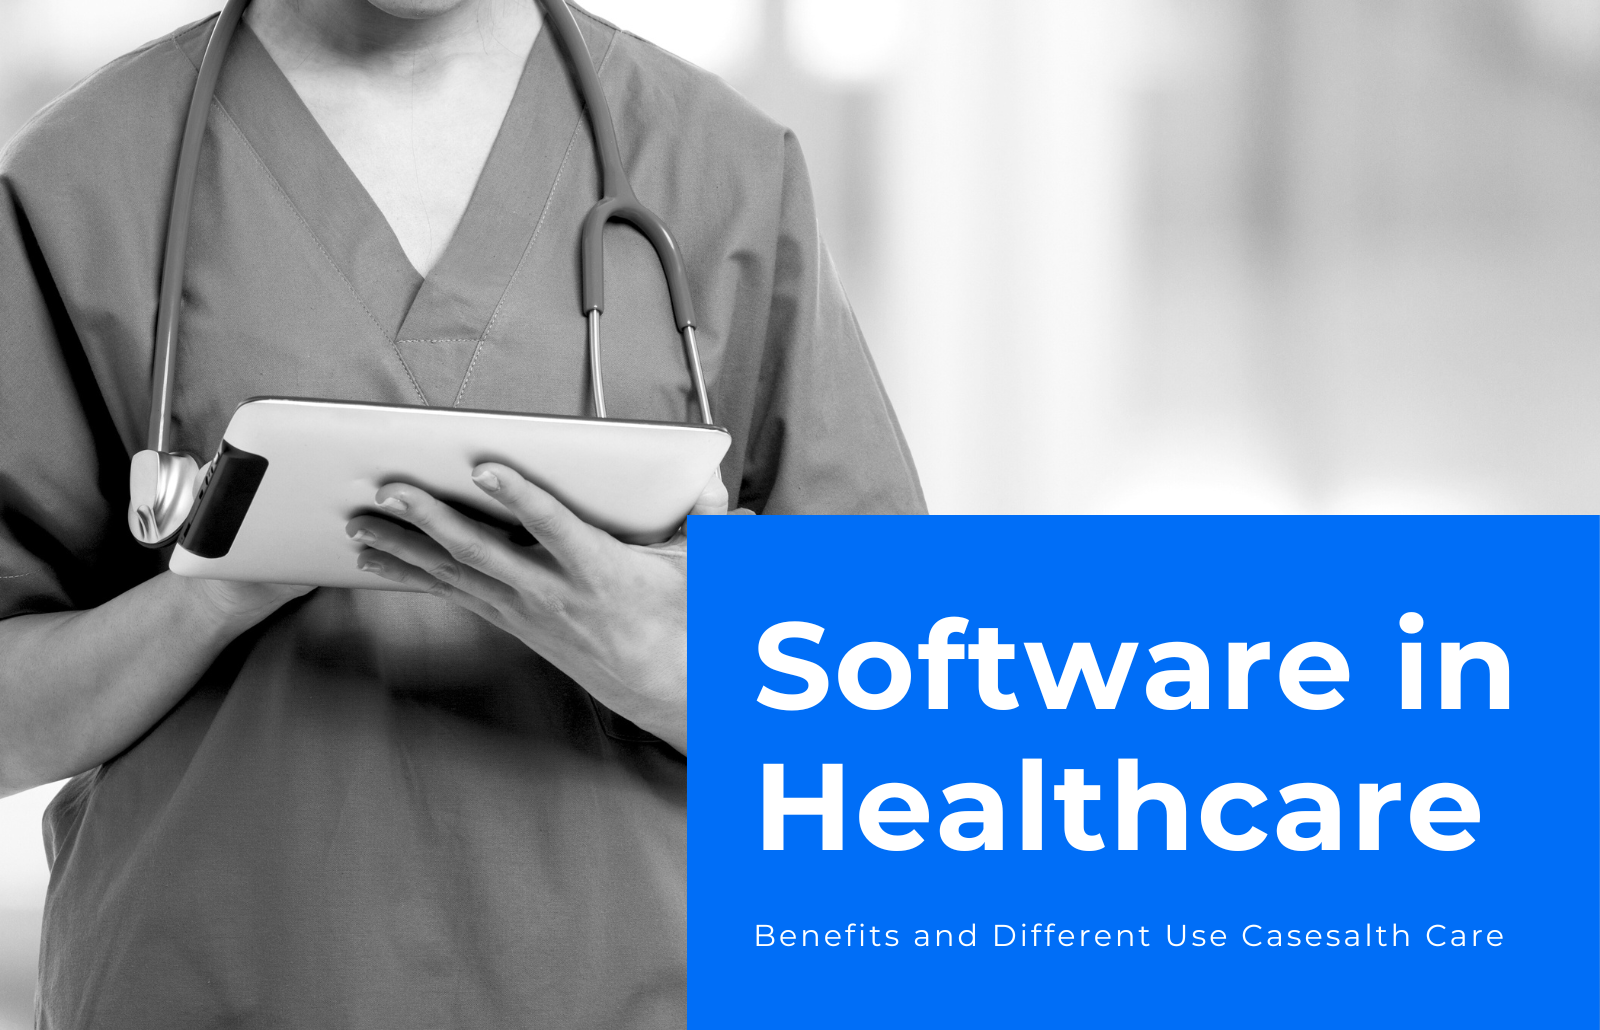 Software in Healthcare - Benefits and Different Use Cases